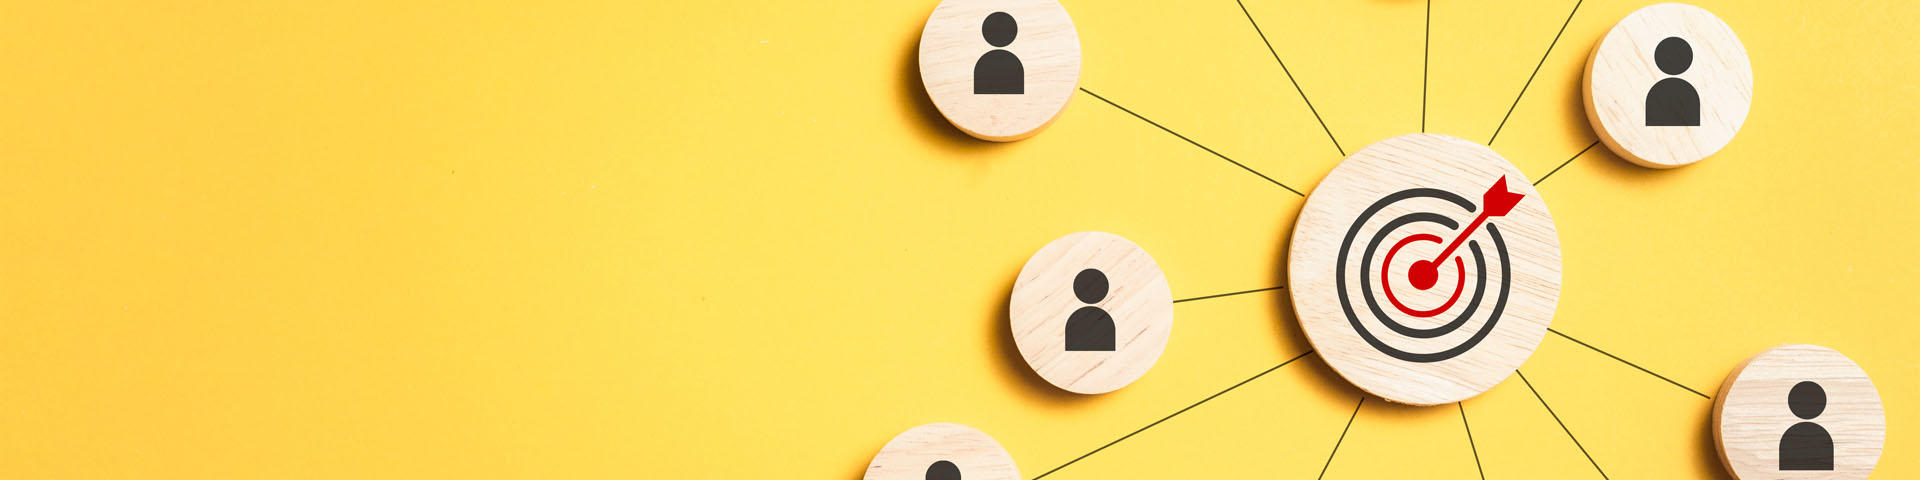 Customer relationship management concept, wooden block with target icon linked with human icons for customer focus groups.